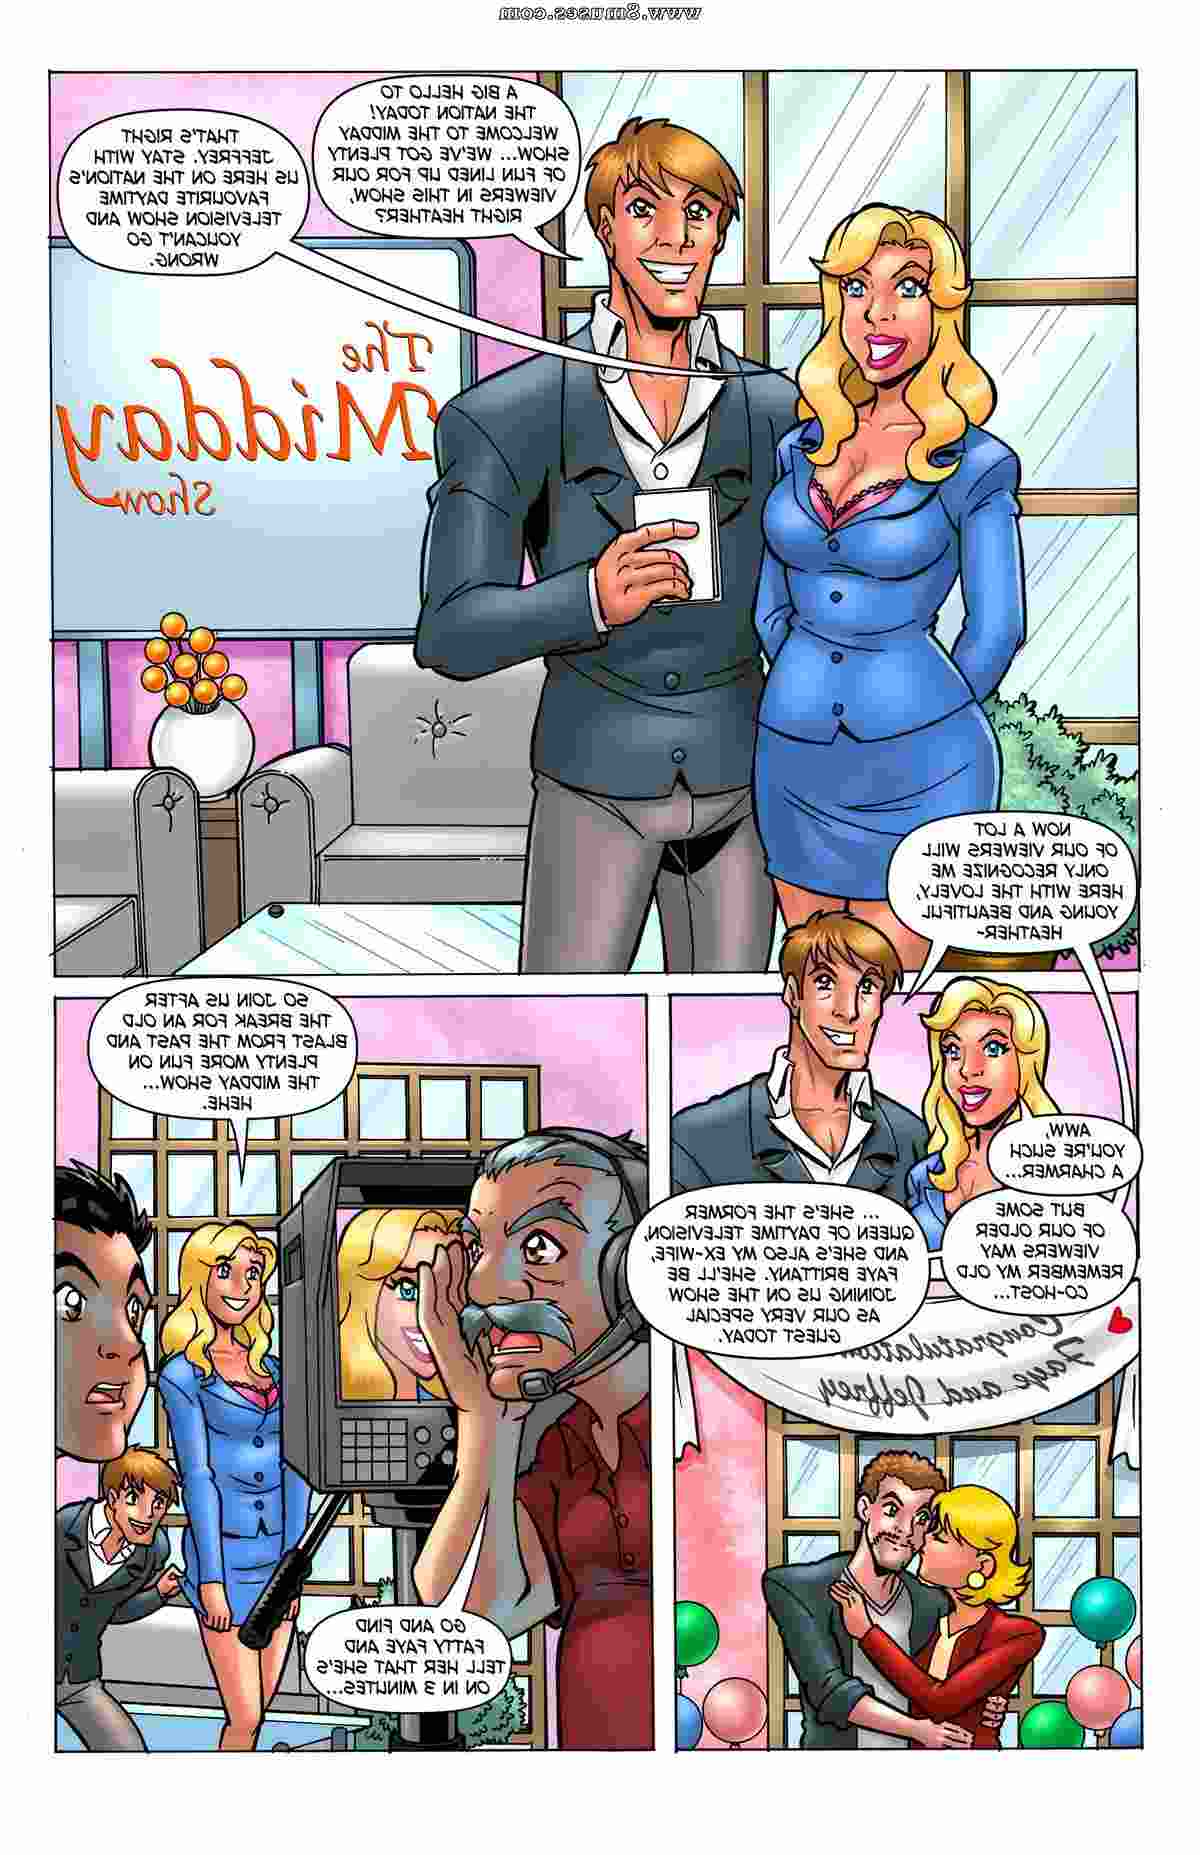 Expansionfan-Comics/The-Midday-Show The_Midday_Show__8muses_-_Sex_and_Porn_Comics_3.jpg